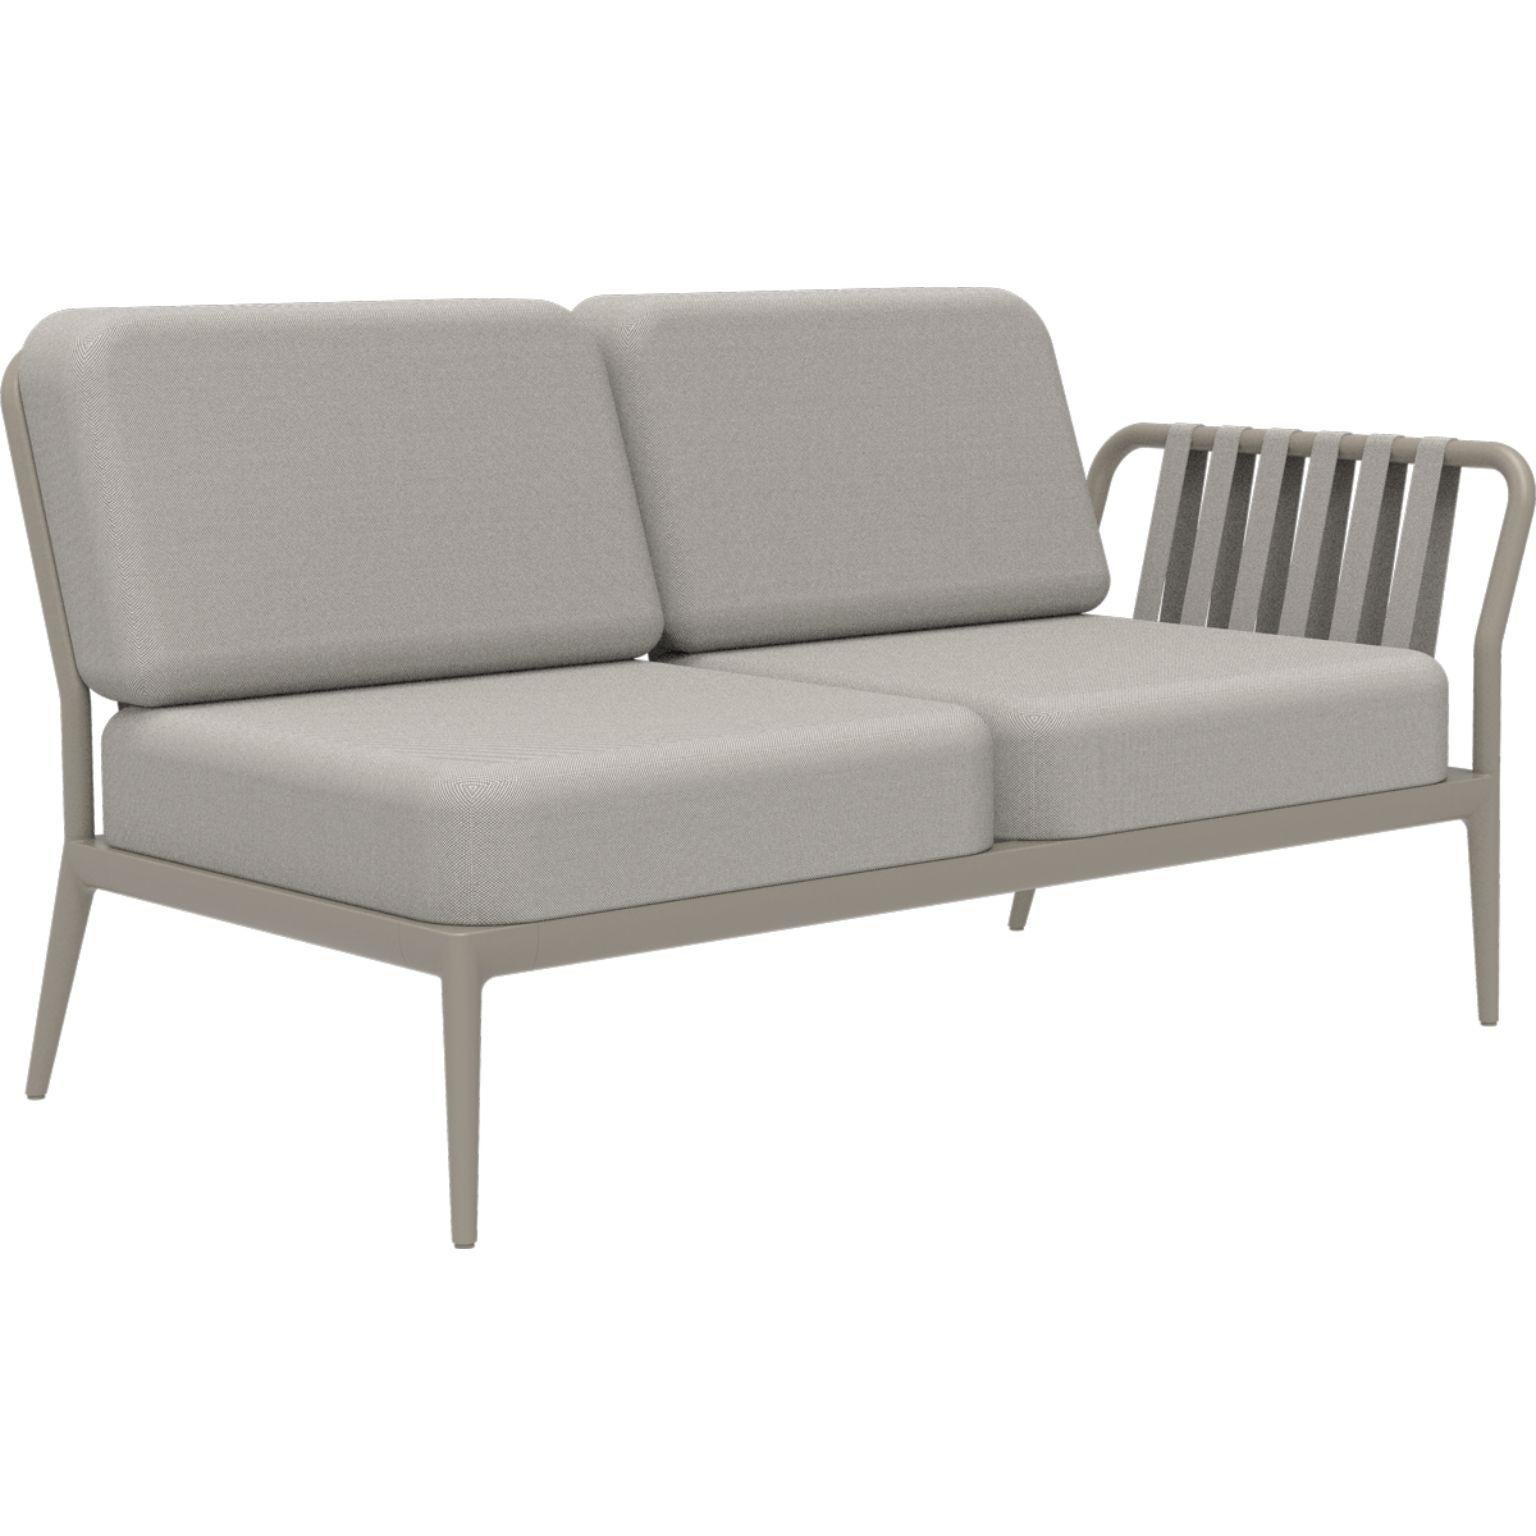 Ribbons Cream Double Left Modular sofa by MOWEE
Dimensions: D83 x W148 x H81 cm (seat height 42 cm).
Material: Aluminum and upholstery.
Weight: 29 kg
Also available in different colors and finishes.

An unmistakable collection for its beauty